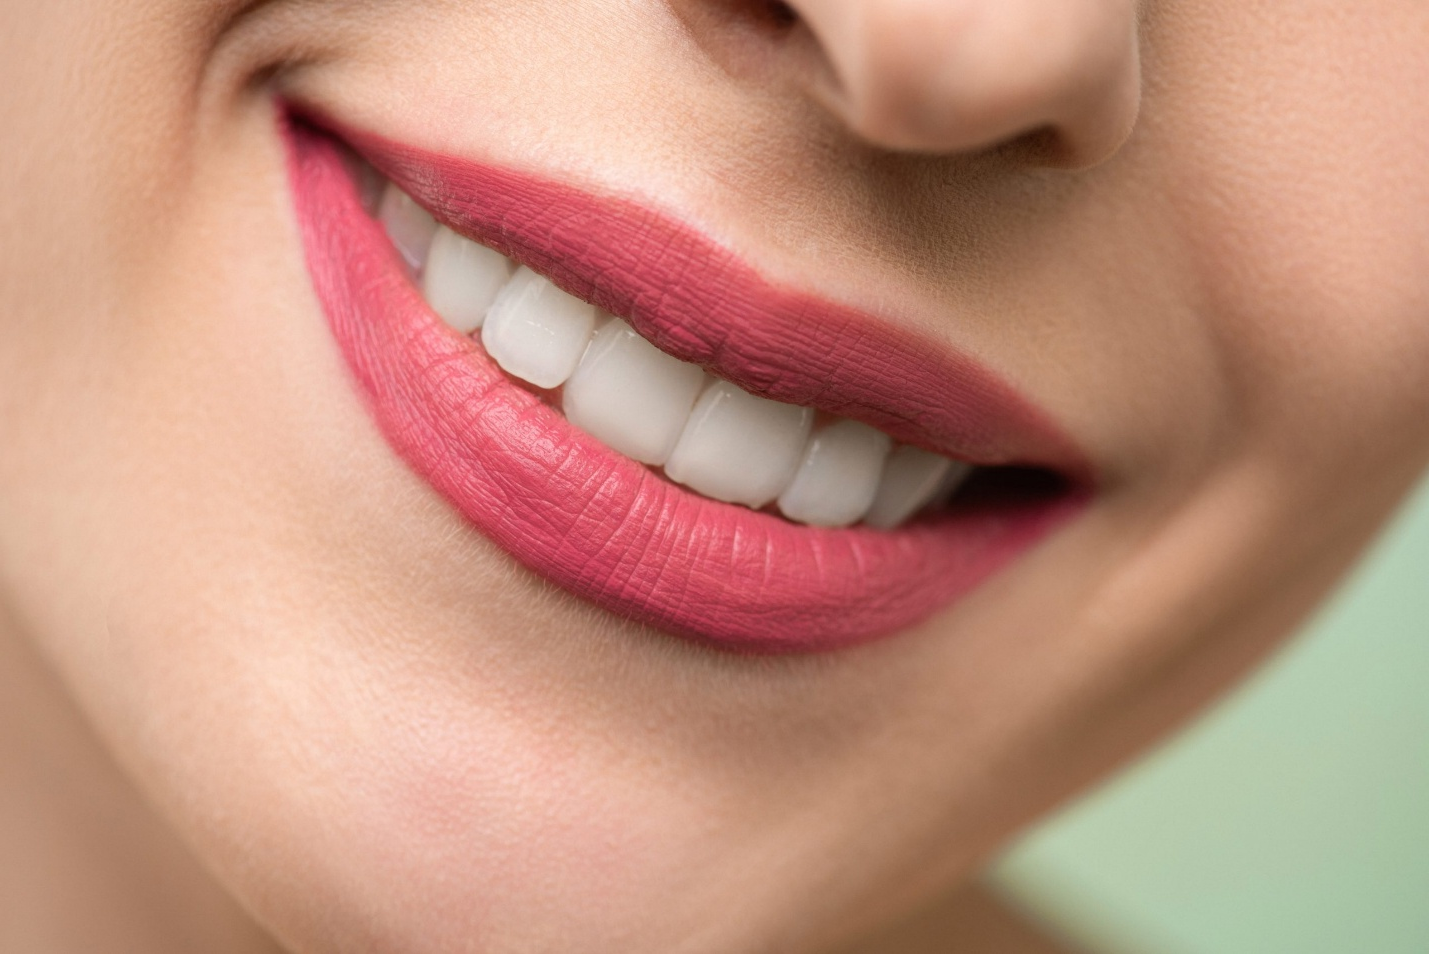 Guide to the best cosmetic dentistry options